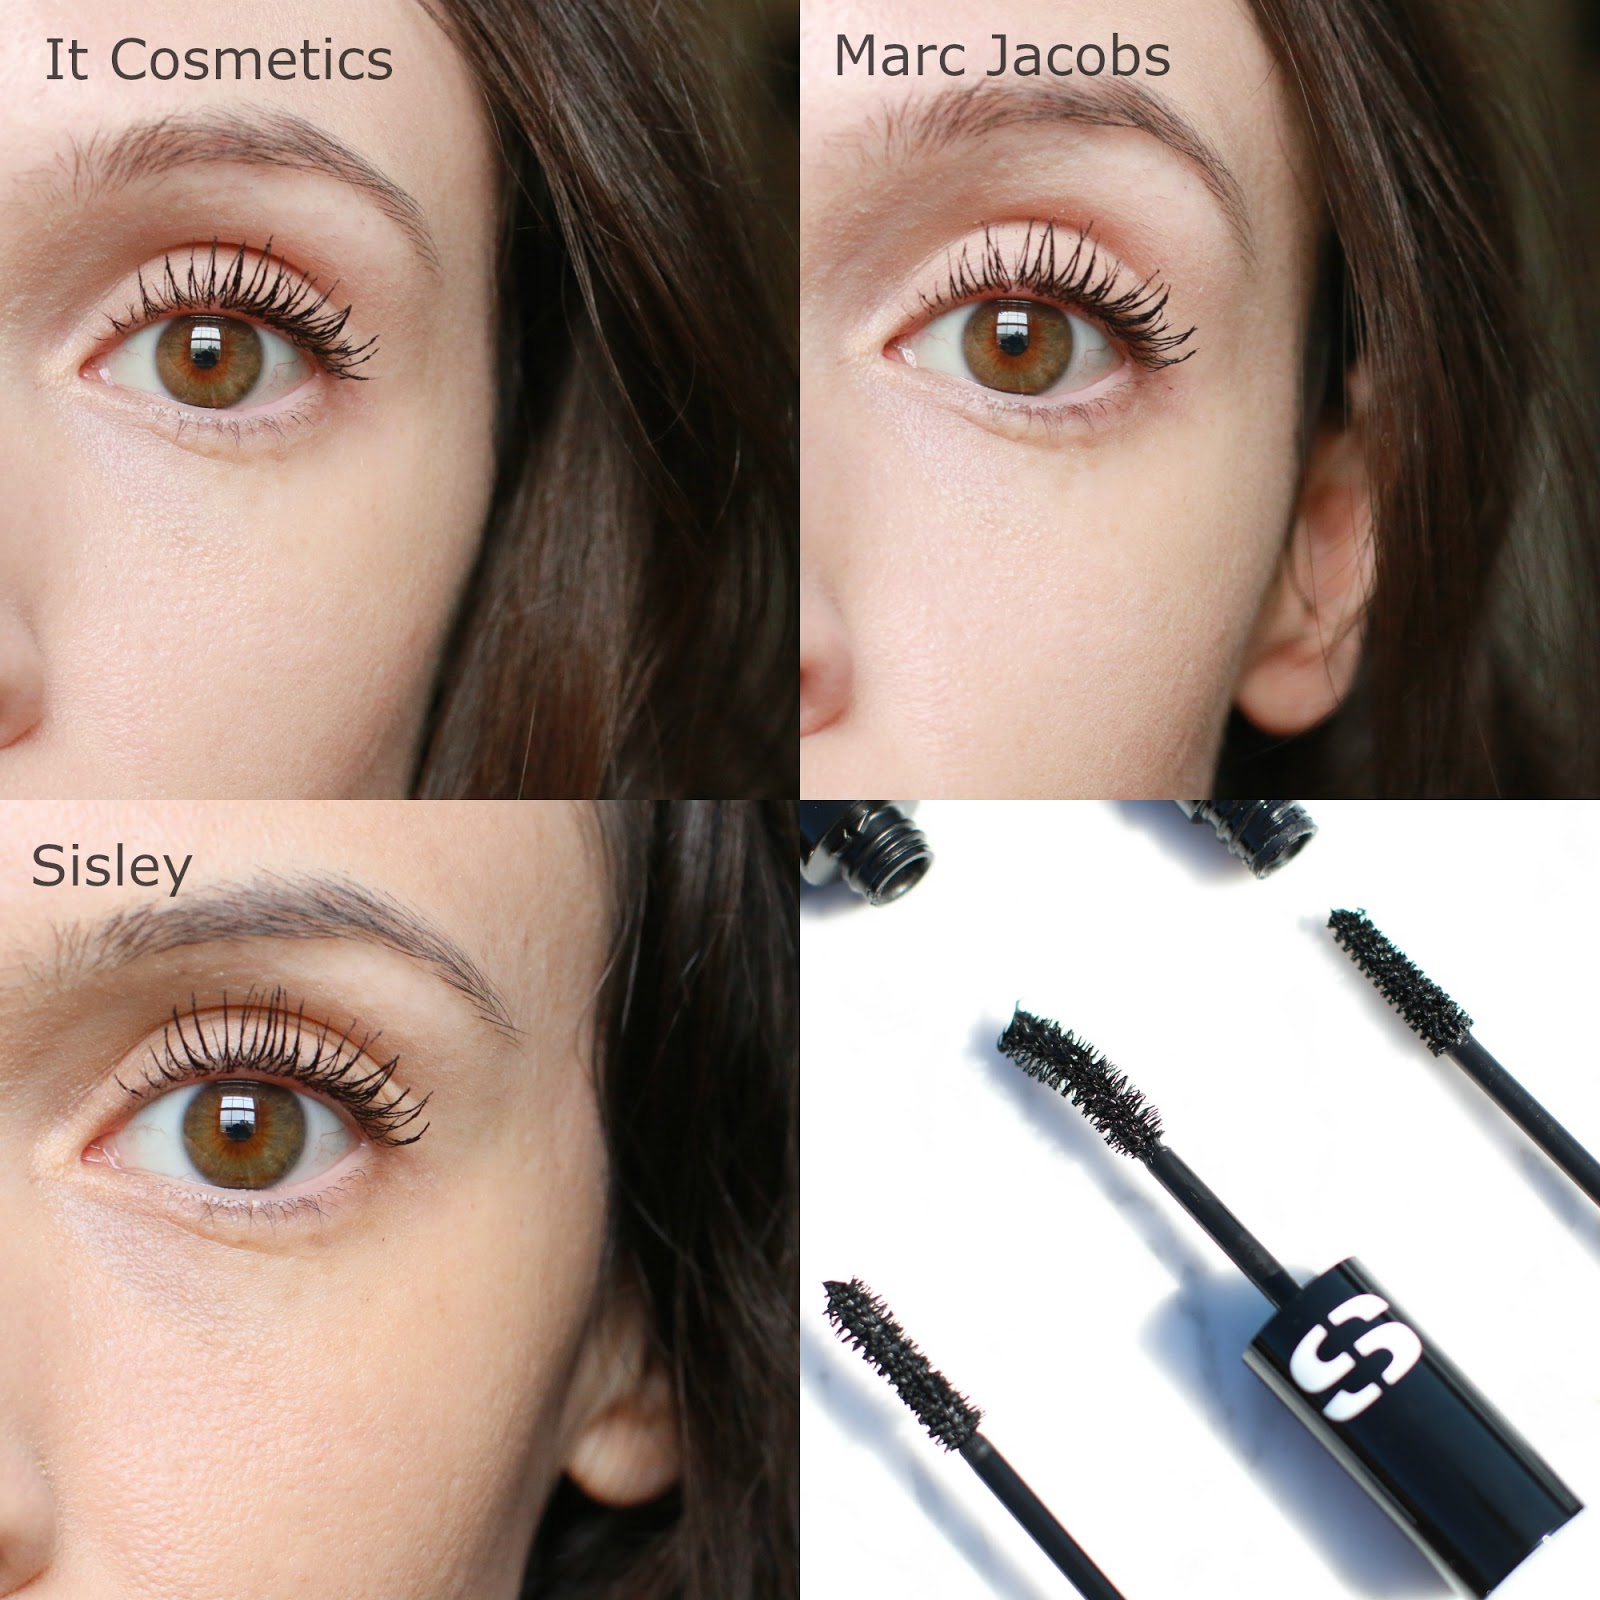 3 New Mascaras Worth Trying From It Cosmetics, Marc Jacobs and Sisley alittlebitetc